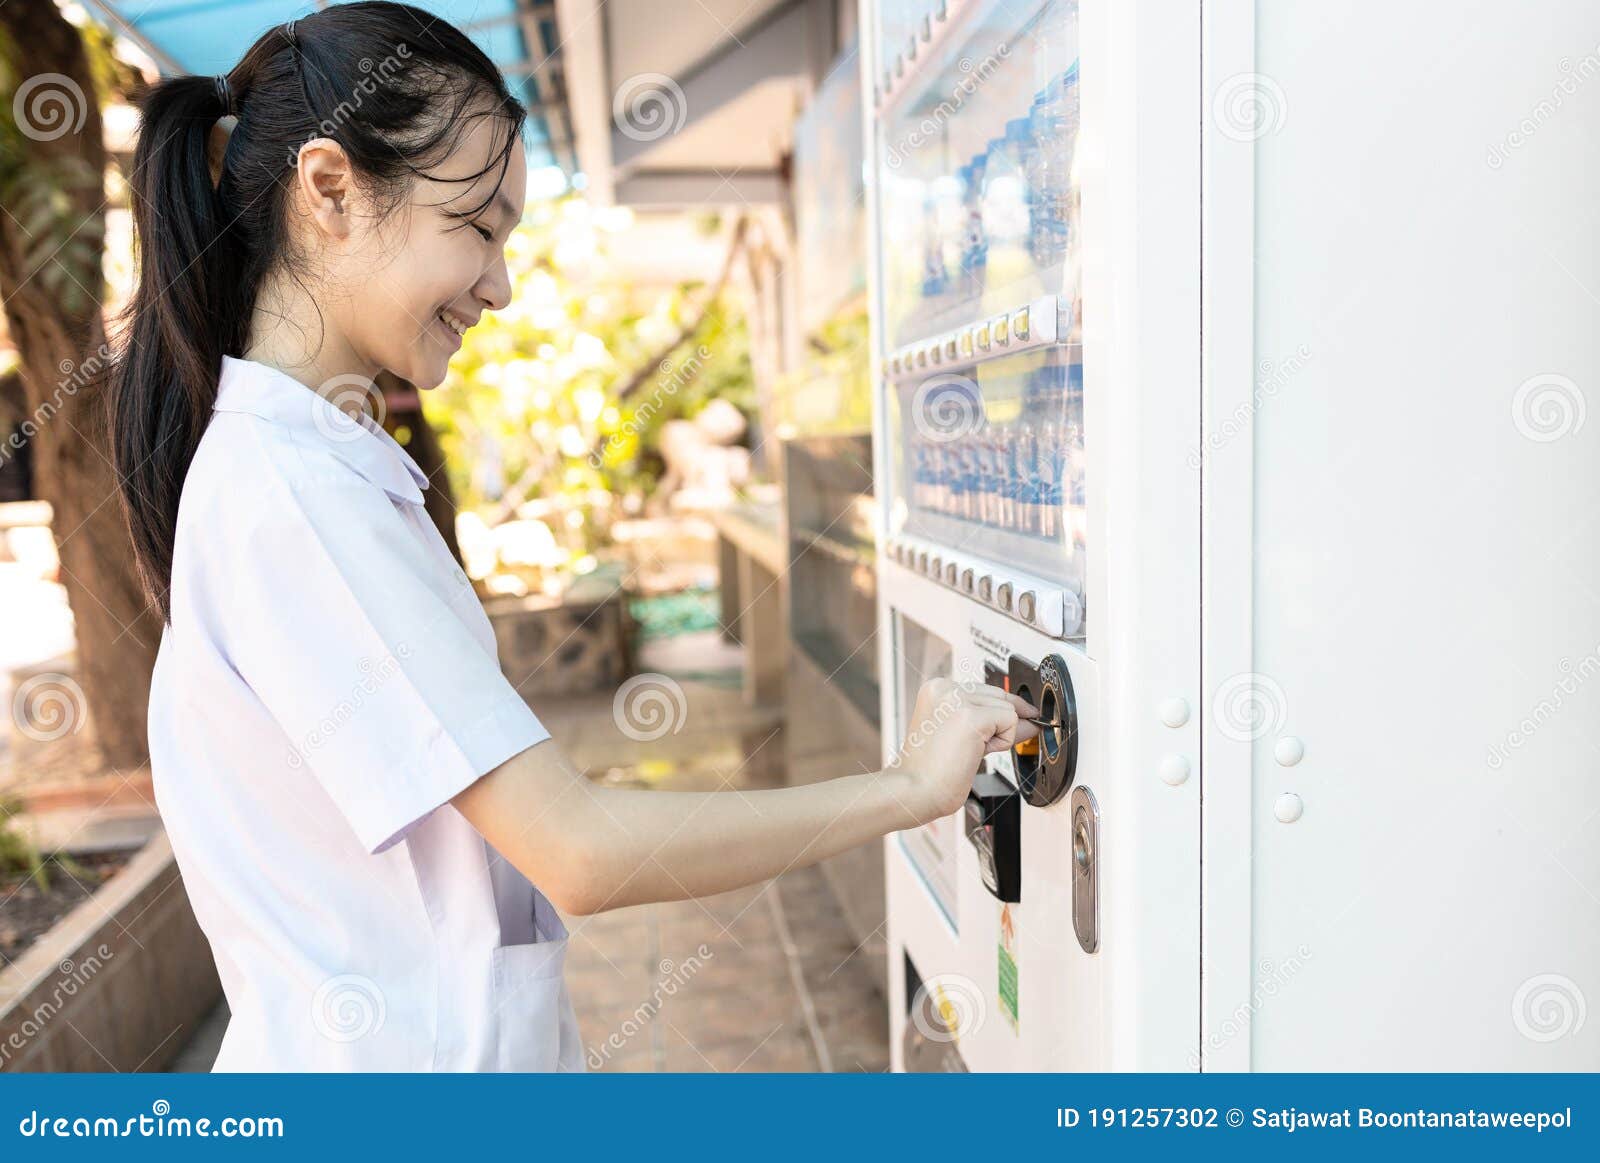 asian people paying or buying hygienic drinking water from automatic vending machine in area lacking clean water,student inserting